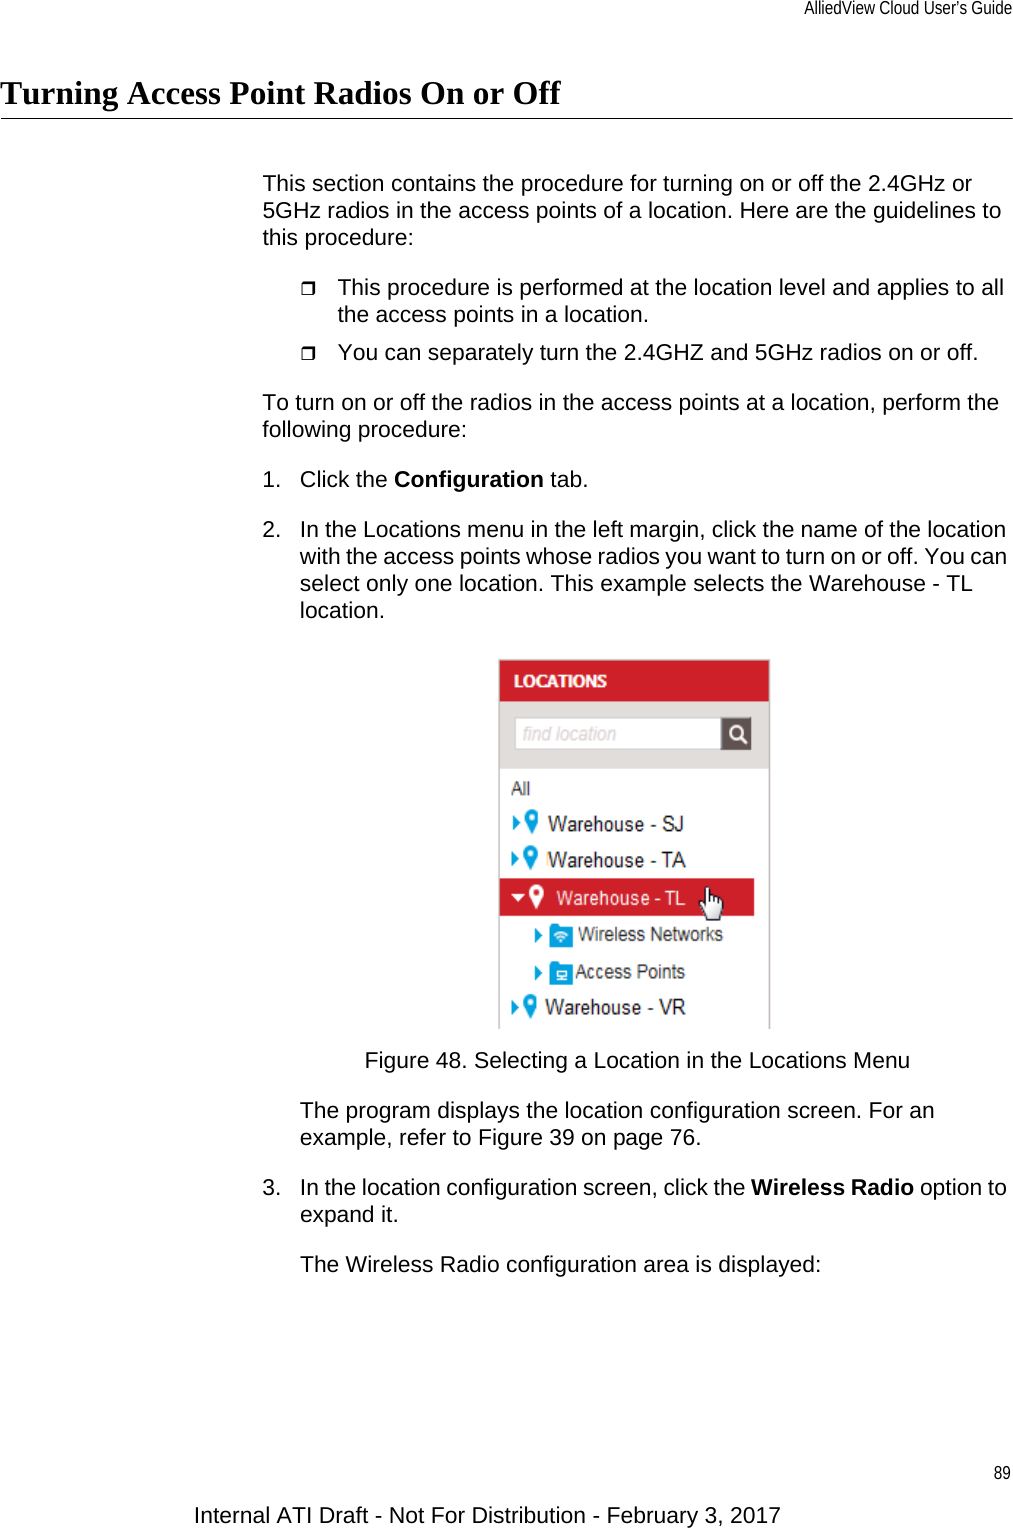 AlliedView Cloud User’s Guide89Turning Access Point Radios On or OffThis section contains the procedure for turning on or off the 2.4GHz or 5GHz radios in the access points of a location. Here are the guidelines to this procedure:This procedure is performed at the location level and applies to all the access points in a location.You can separately turn the 2.4GHZ and 5GHz radios on or off.To turn on or off the radios in the access points at a location, perform the following procedure:1. Click the Configuration tab.2. In the Locations menu in the left margin, click the name of the location with the access points whose radios you want to turn on or off. You can select only one location. This example selects the Warehouse - TL location.Figure 48. Selecting a Location in the Locations MenuThe program displays the location configuration screen. For an example, refer to Figure 39 on page 76.3. In the location configuration screen, click the Wireless Radio option to expand it.The Wireless Radio configuration area is displayed:Internal ATI Draft - Not For Distribution - February 3, 2017